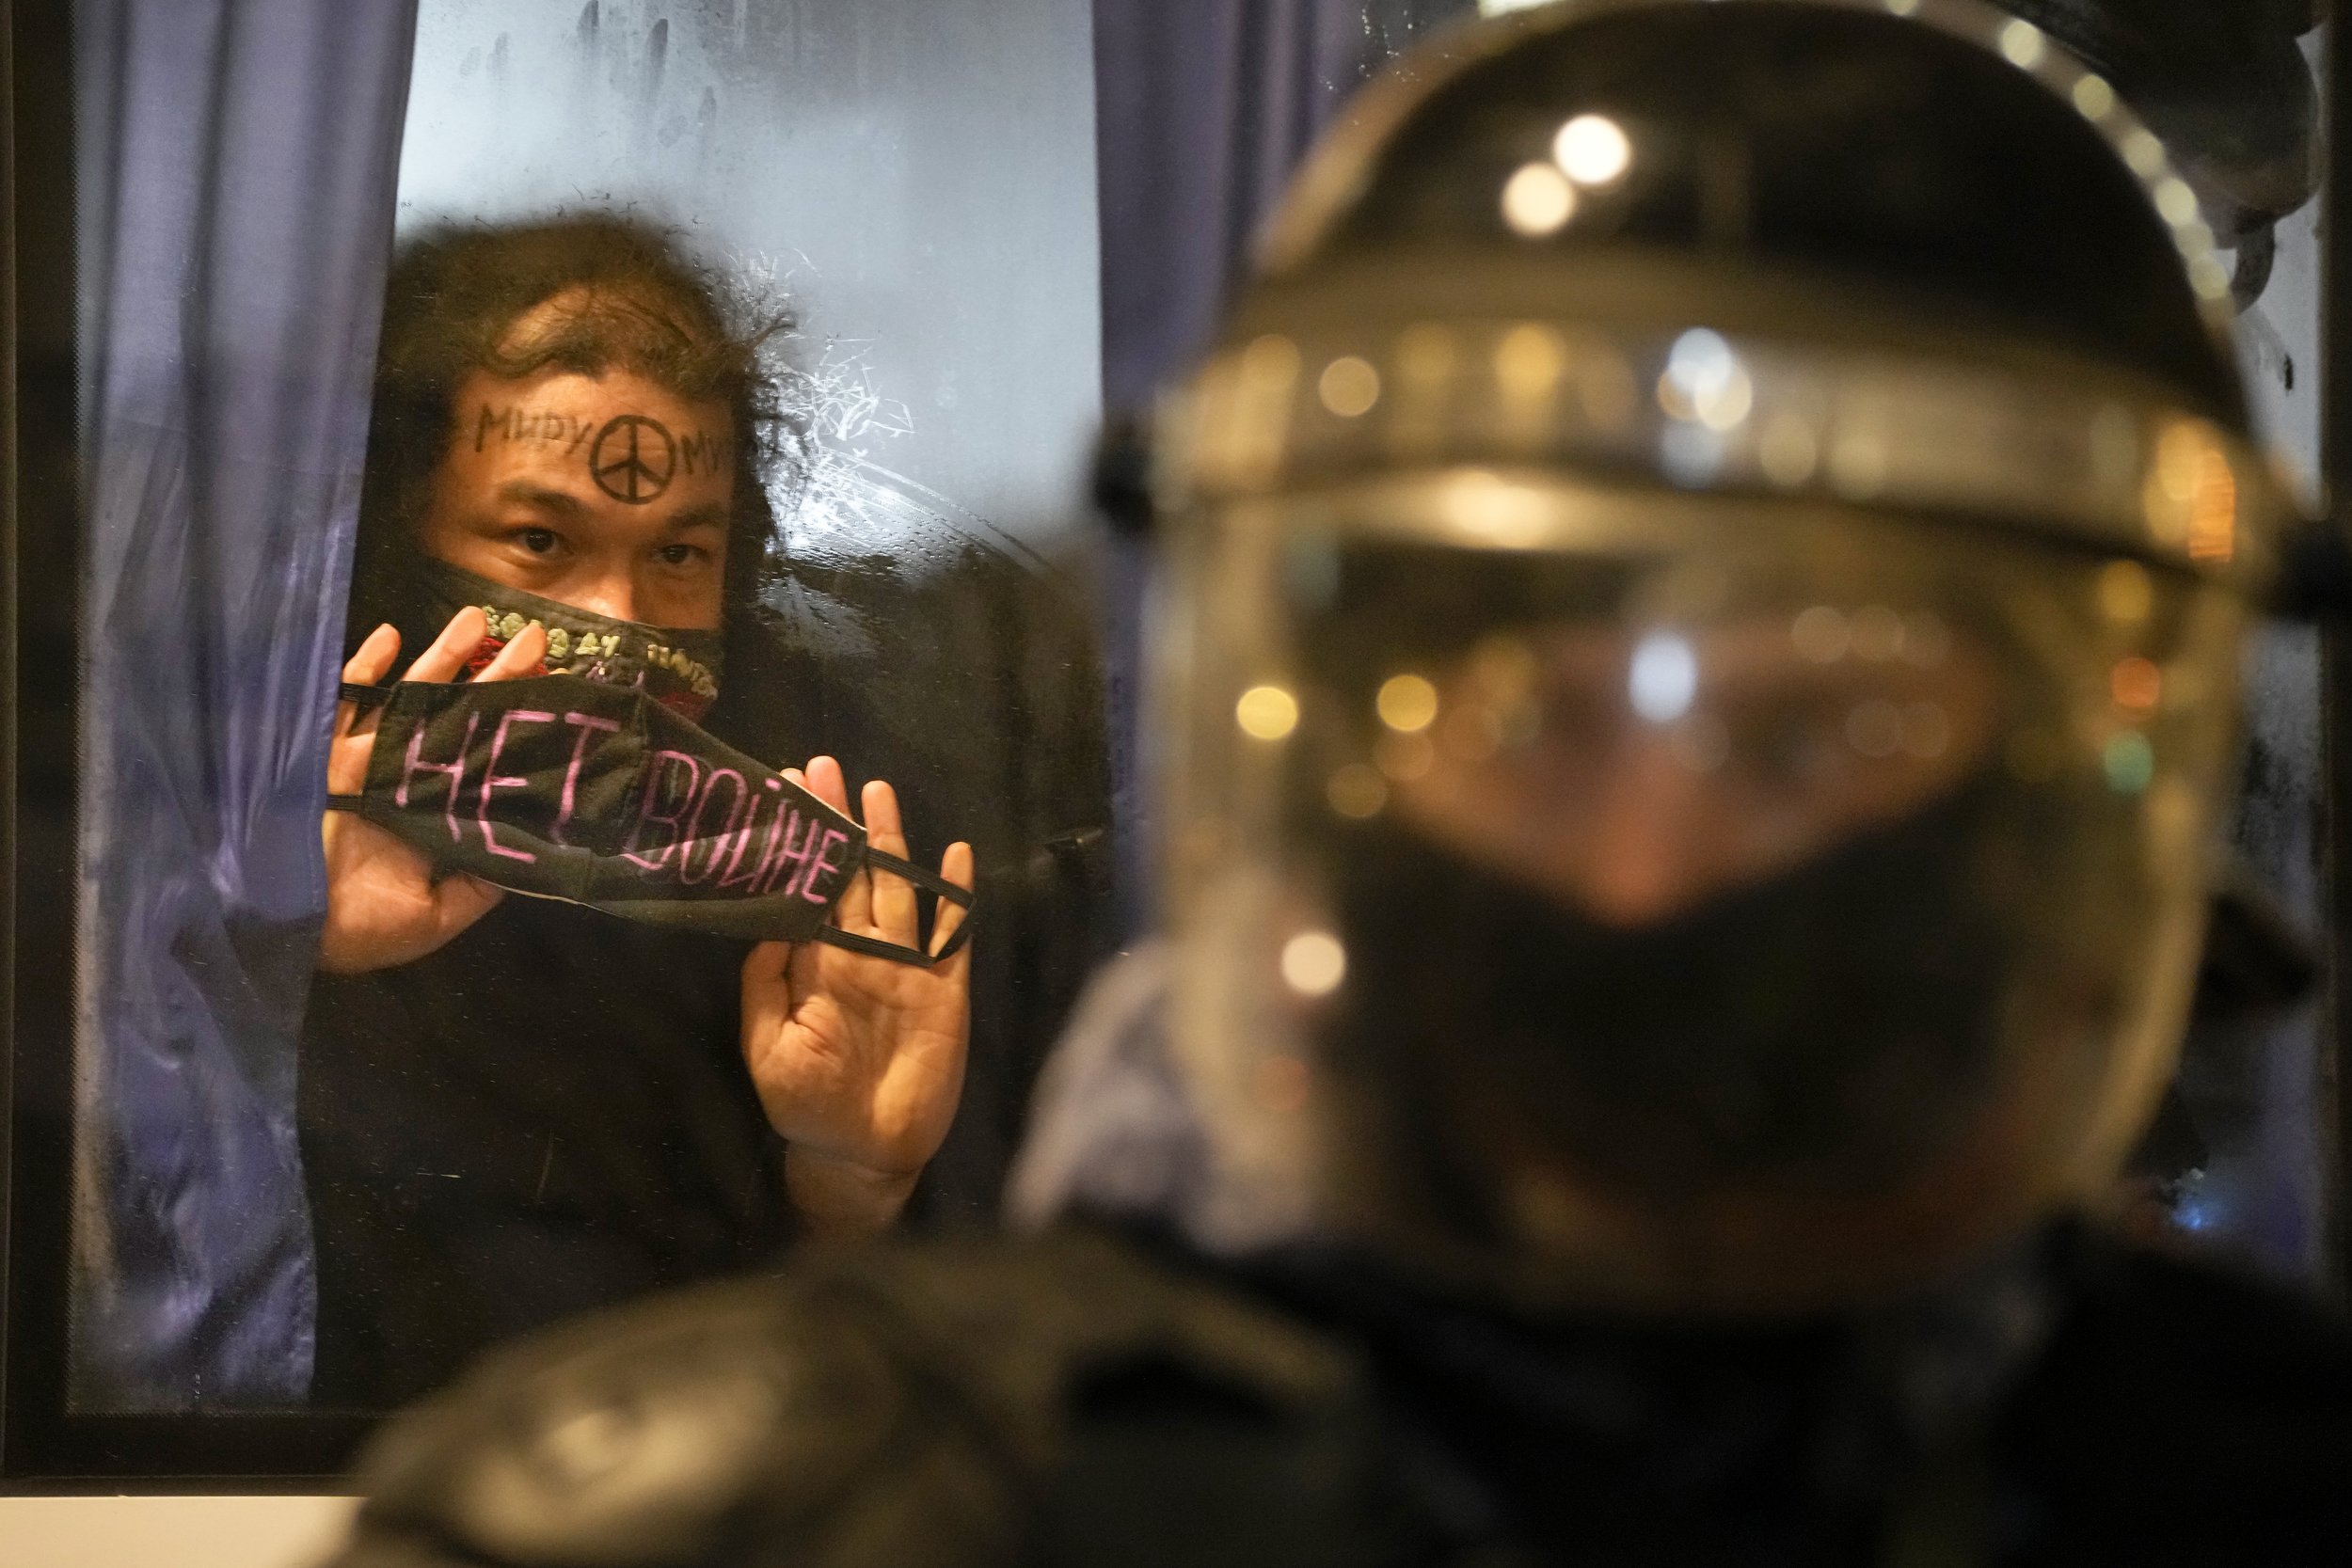  A detained demonstrator shows a sign 'No War!' from a police bus in St. Petersburg, Russia, Thursday, Feb. 24, 2022. Hundreds of people gathered in Moscow and St. Petersburg on Thursday, protesting against Russia's attack on Ukraine. (AP Photo/Dmitr